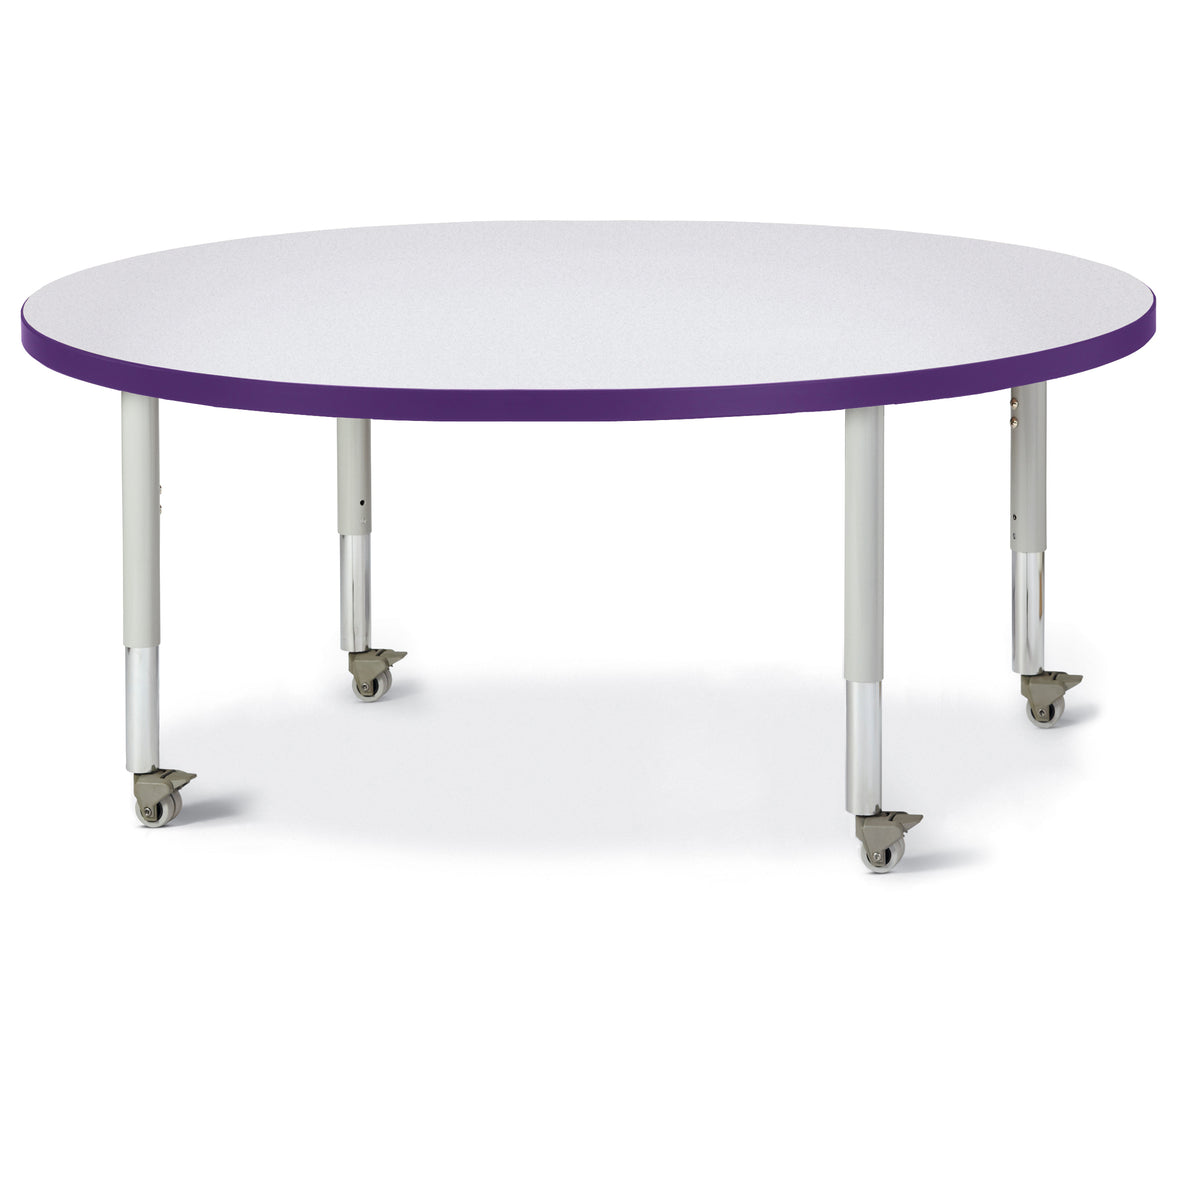 6433JCM004, Berries Round Activity Table - 48" Diameter, Mobile - Freckled Gray/Purple/Gray